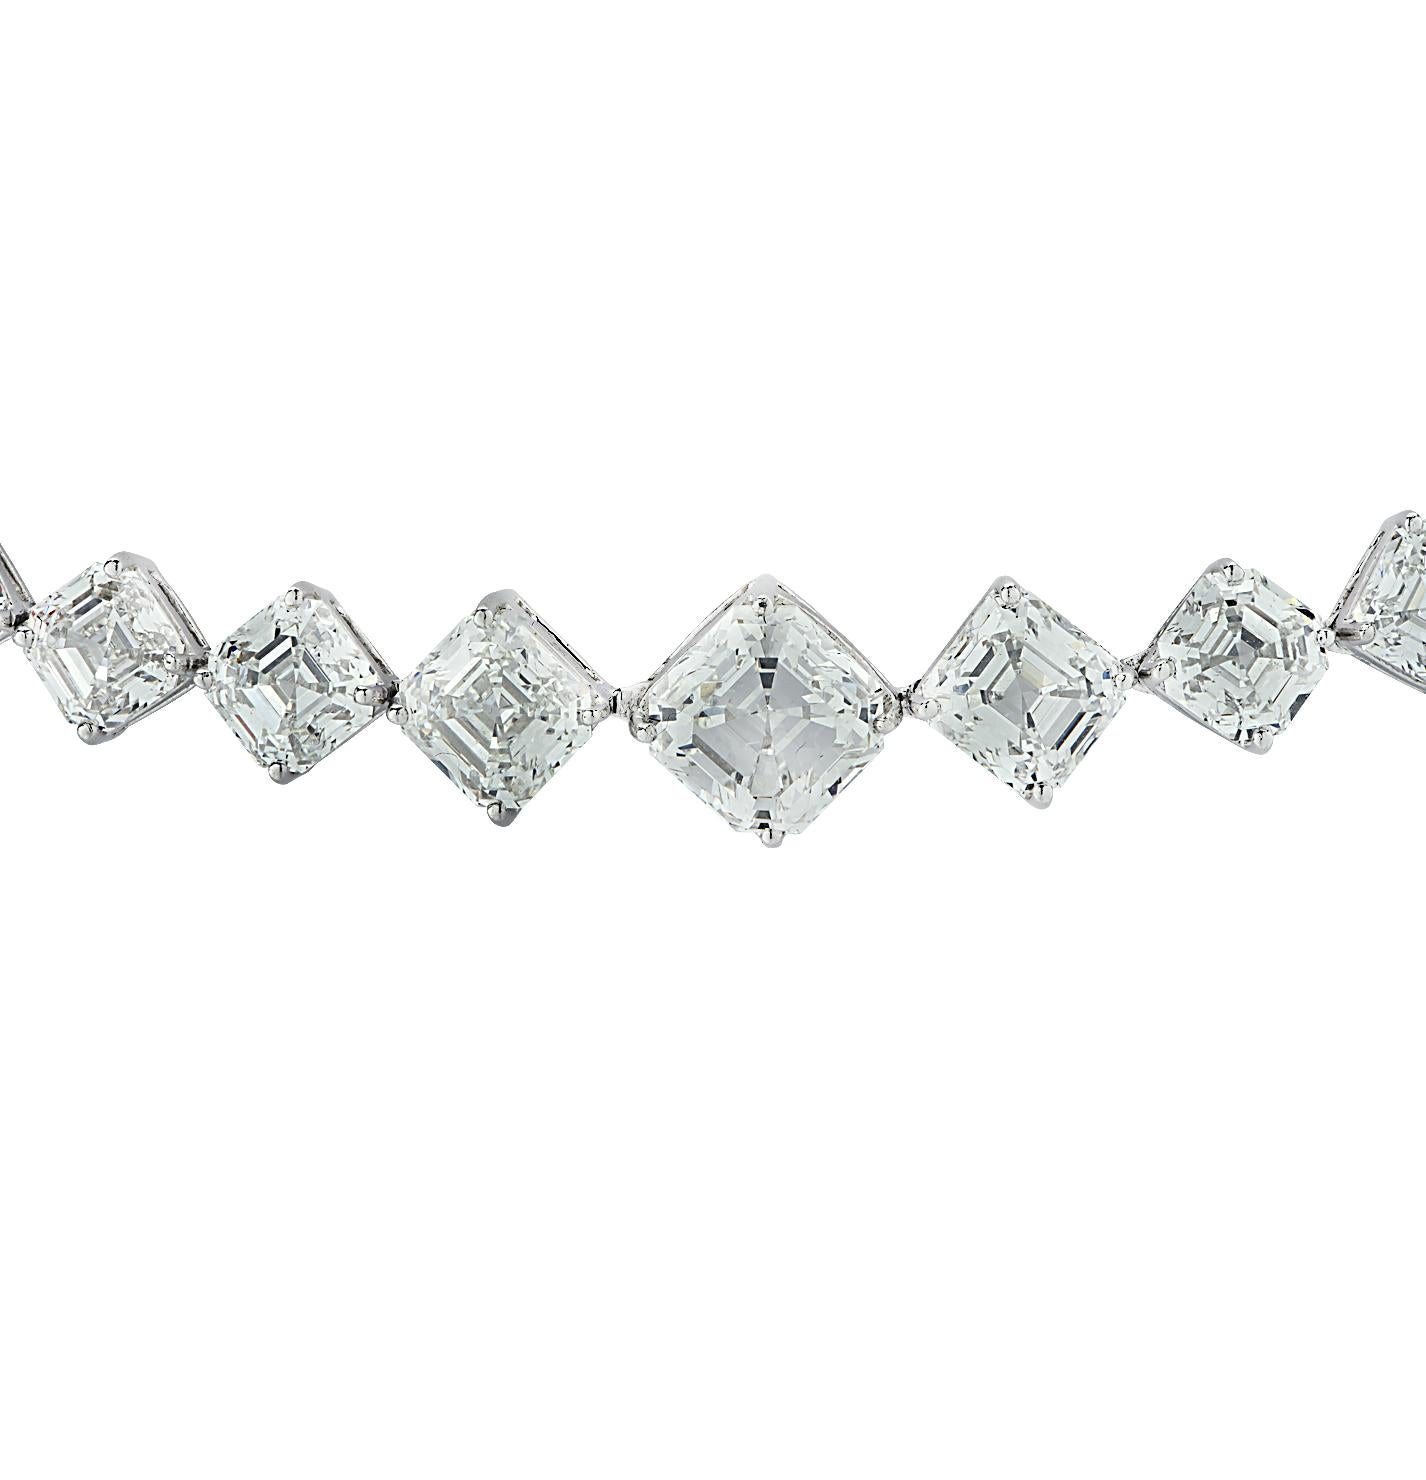 Spectacular Asscher Cut Diamond Riviere necklace crafted in platinum, featuring 65 asscher cut diamonds weighing approximately 42.47 carats total, G-H color, VS clarity. The diamonds are set on the diagonal, graduating in size, culminating in a GIA